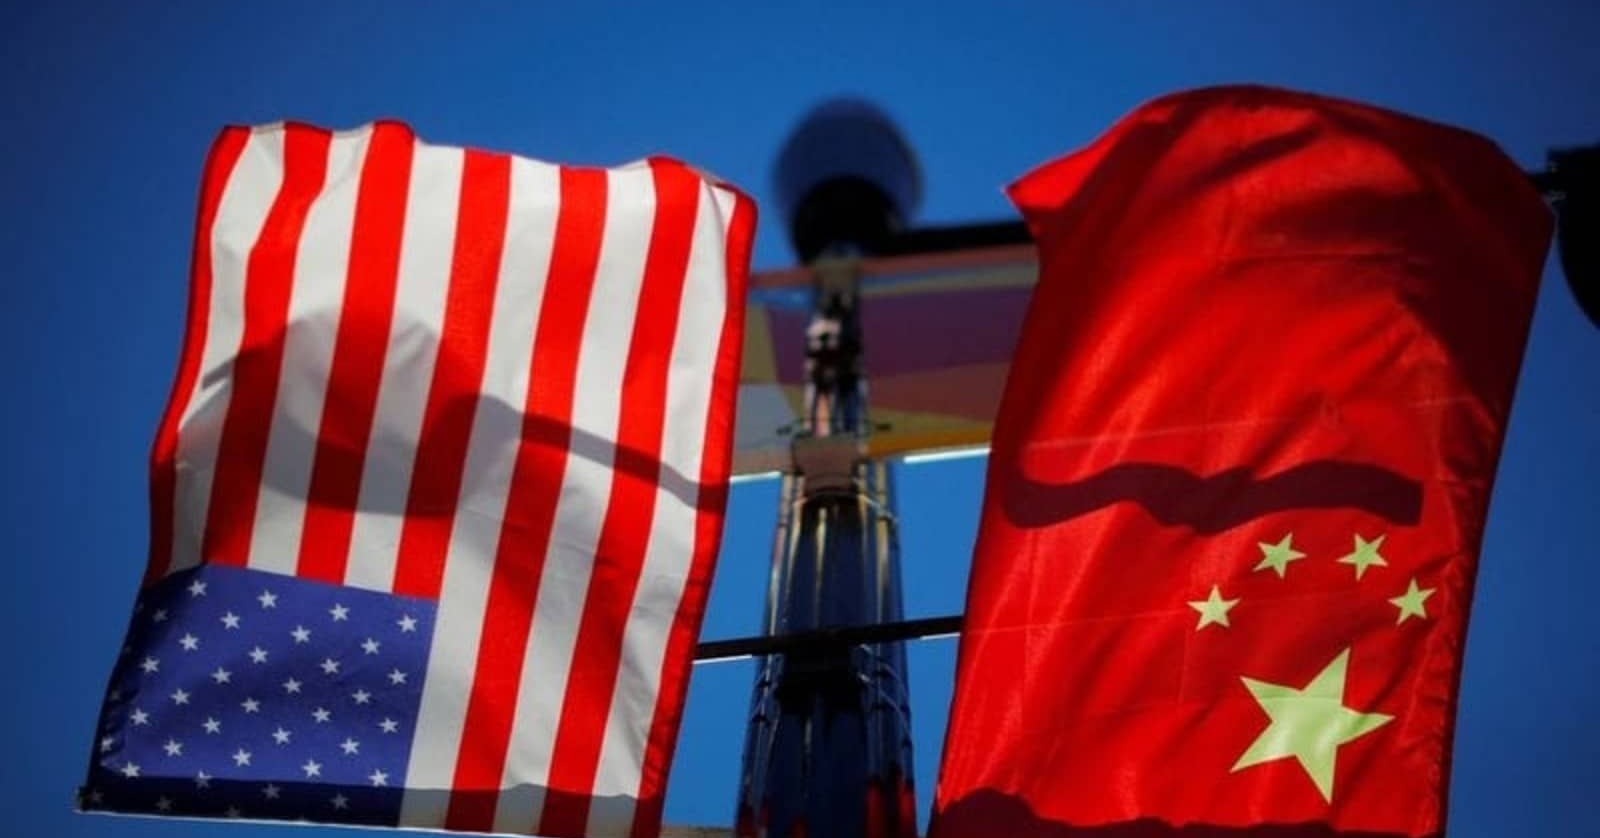 With just one decision, China can make America weaponless